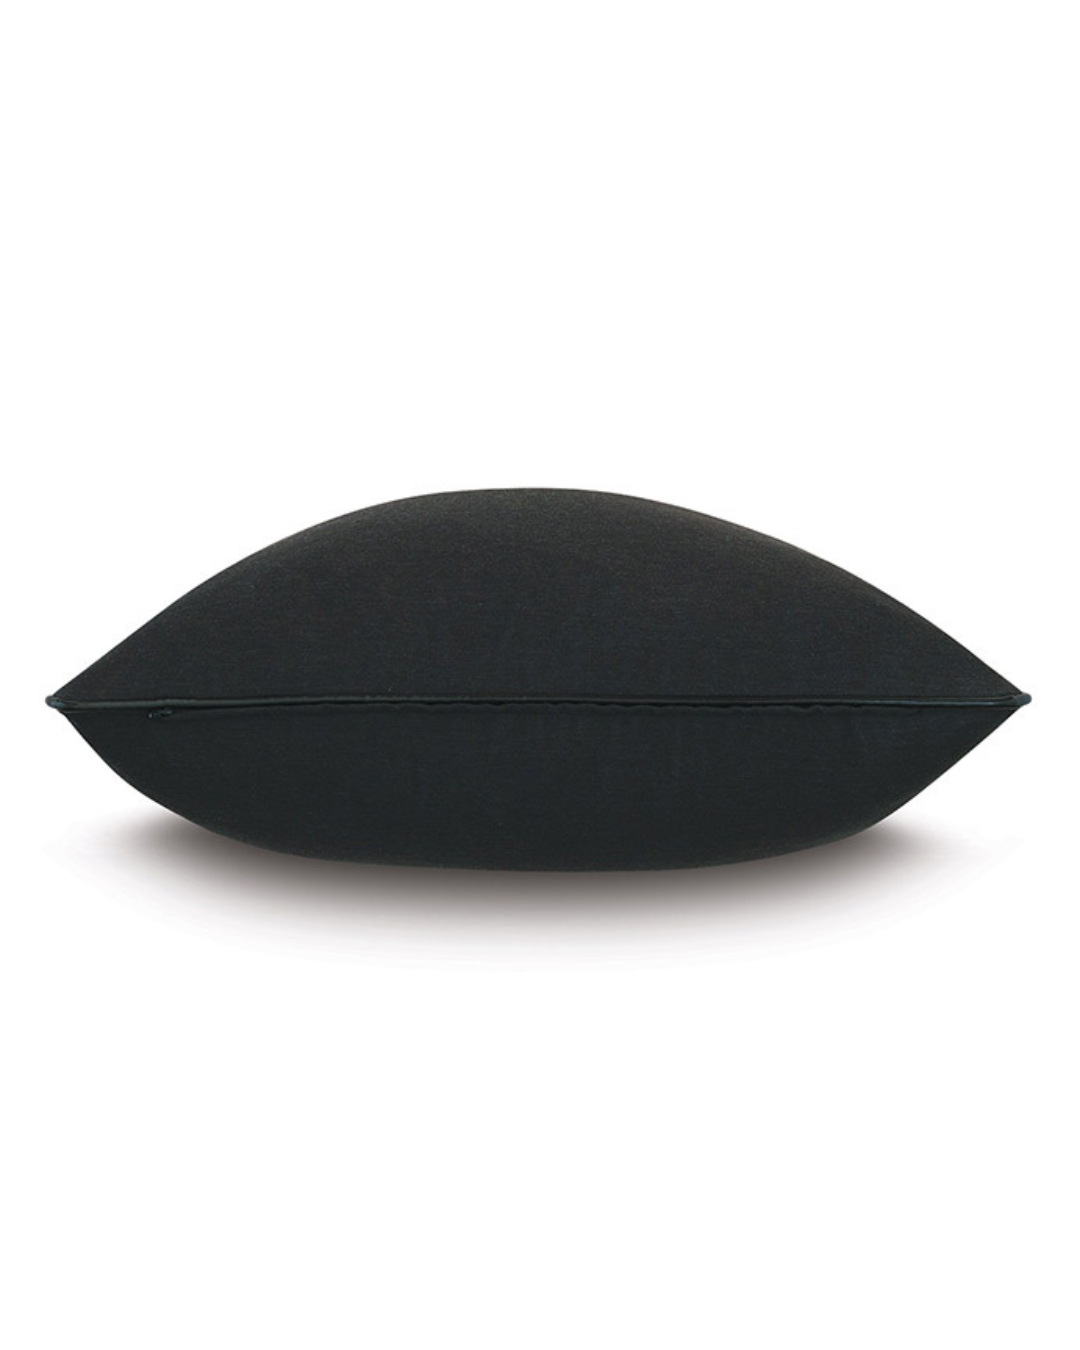 A black, rectangular SOLID EURO SHAM IN BLACK 27x27 by Eastern Accents in a 27x27 size is displayed against a white background. Shown from a side view where the zipper or seam is visible, the pillow appears to be plush and slightly curved at the edges, enhancing its contemporary aesthetic.